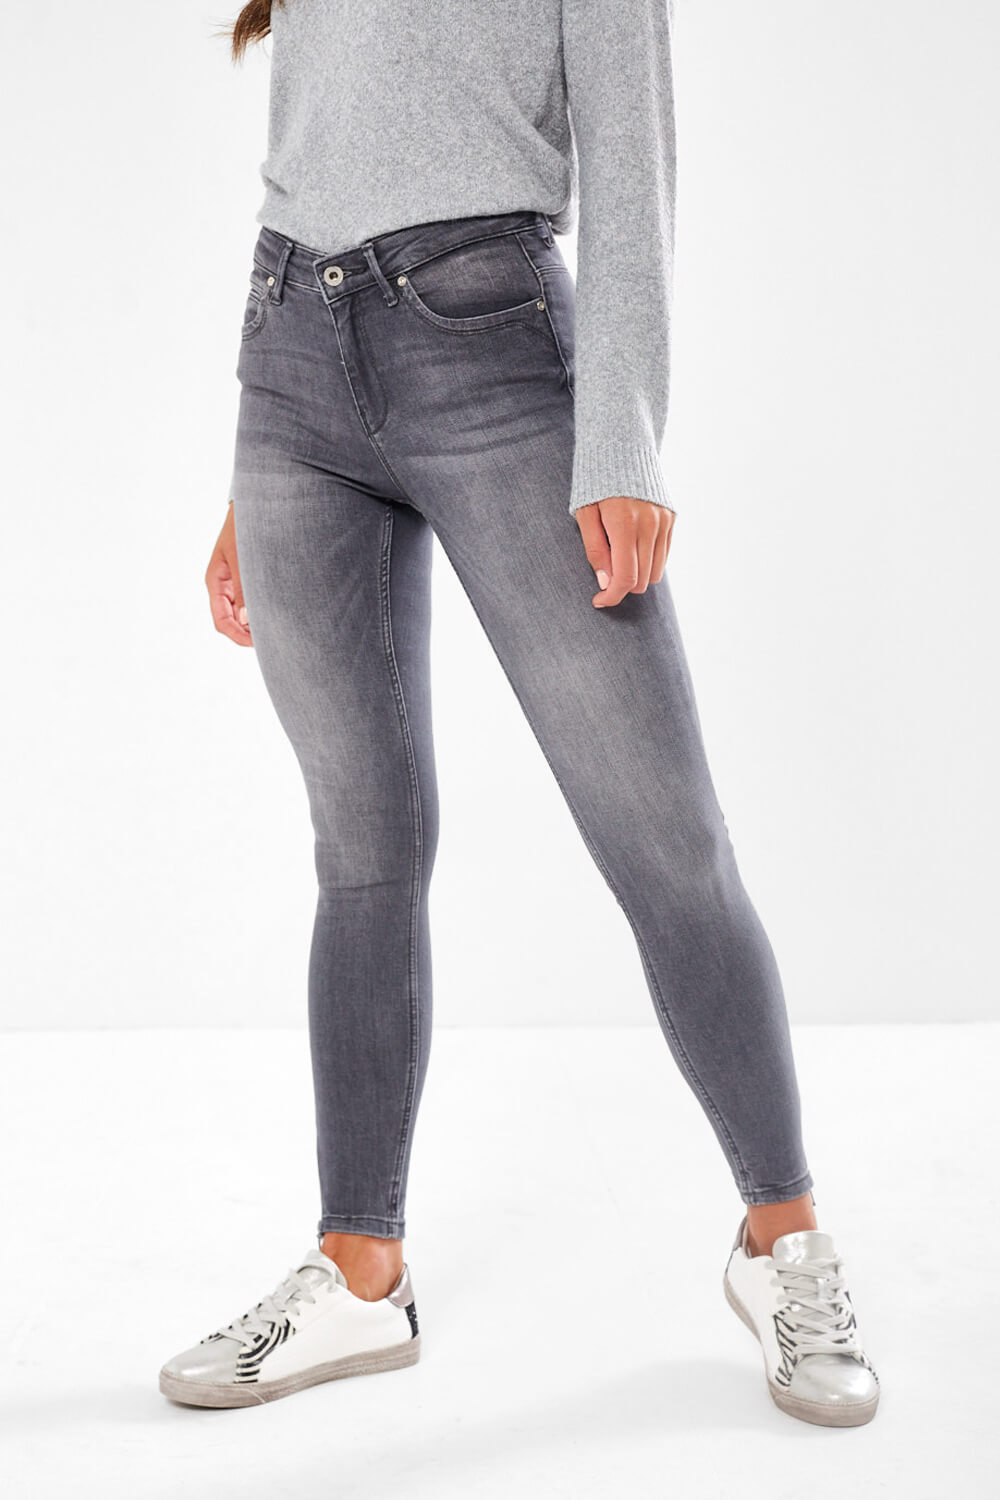 Only Kendell Skinny Ankle Jeans in Grey | iCLOTHING - iCLOTHING